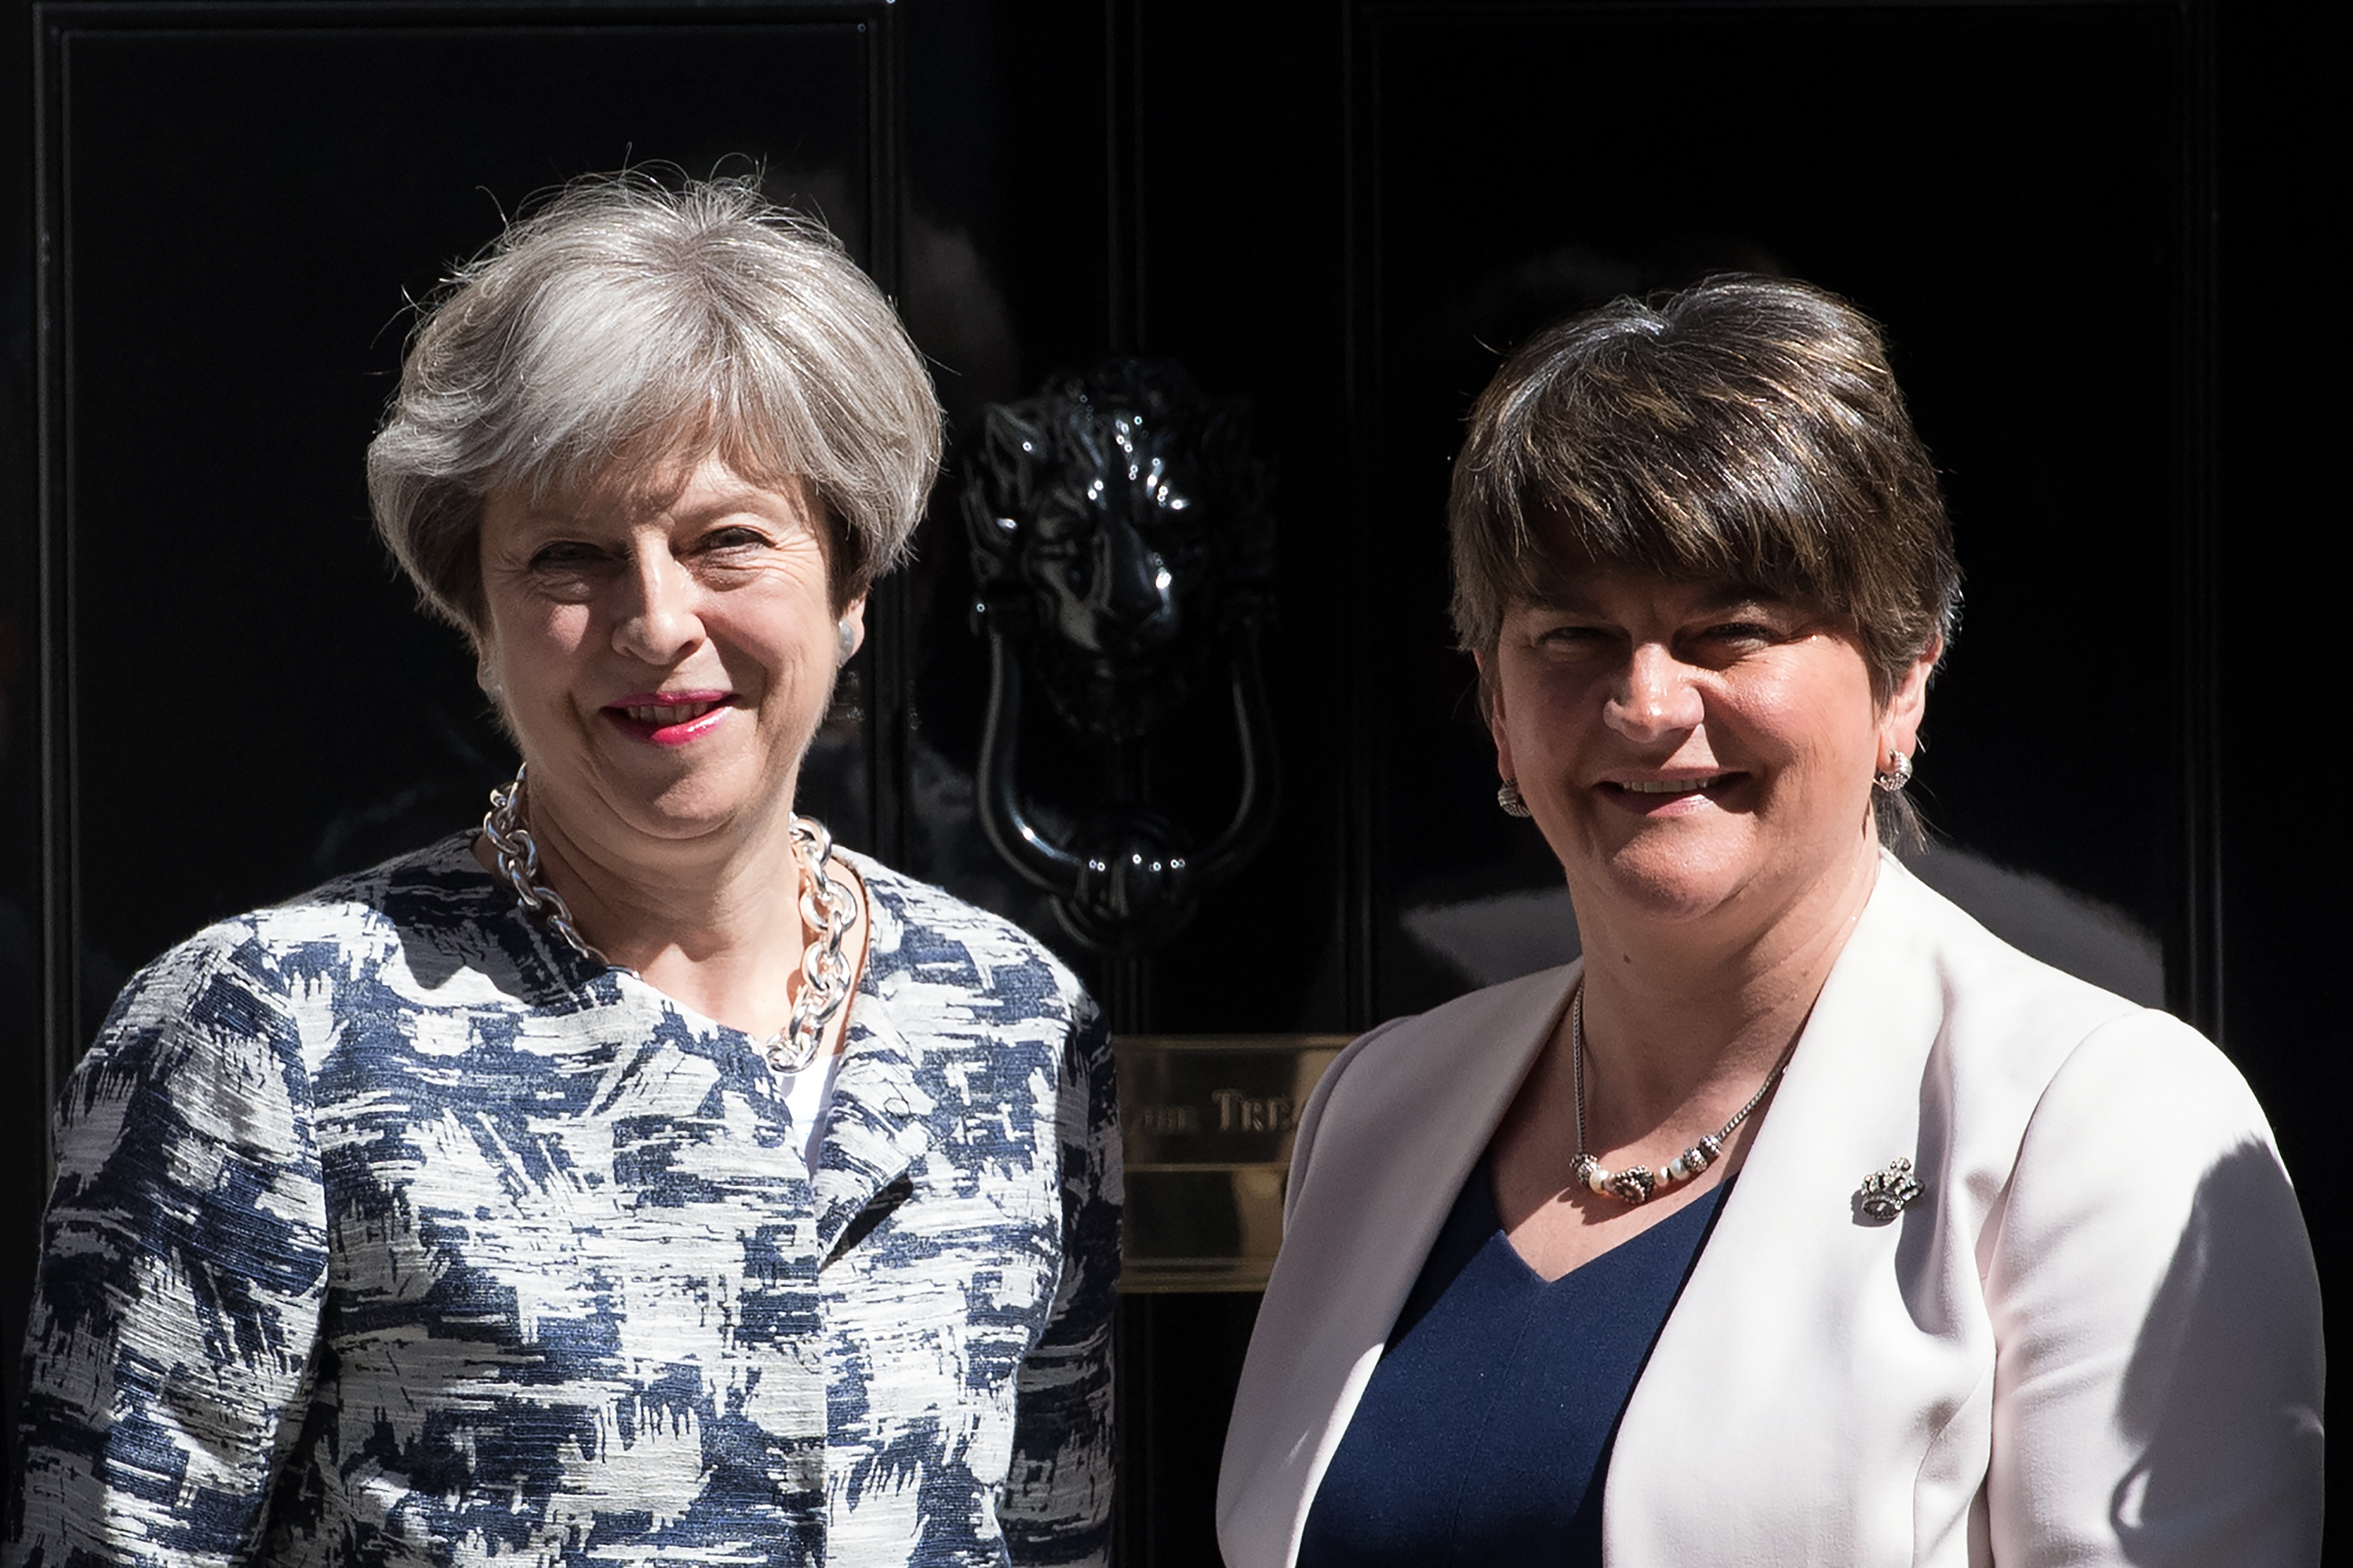 Britain's Prime Minister, Theresa May (L), greets Arlene Foster, the leader of Northern Ireland's Democratic Unionist Party in Downing Street on June 26, 2017 in London, England.